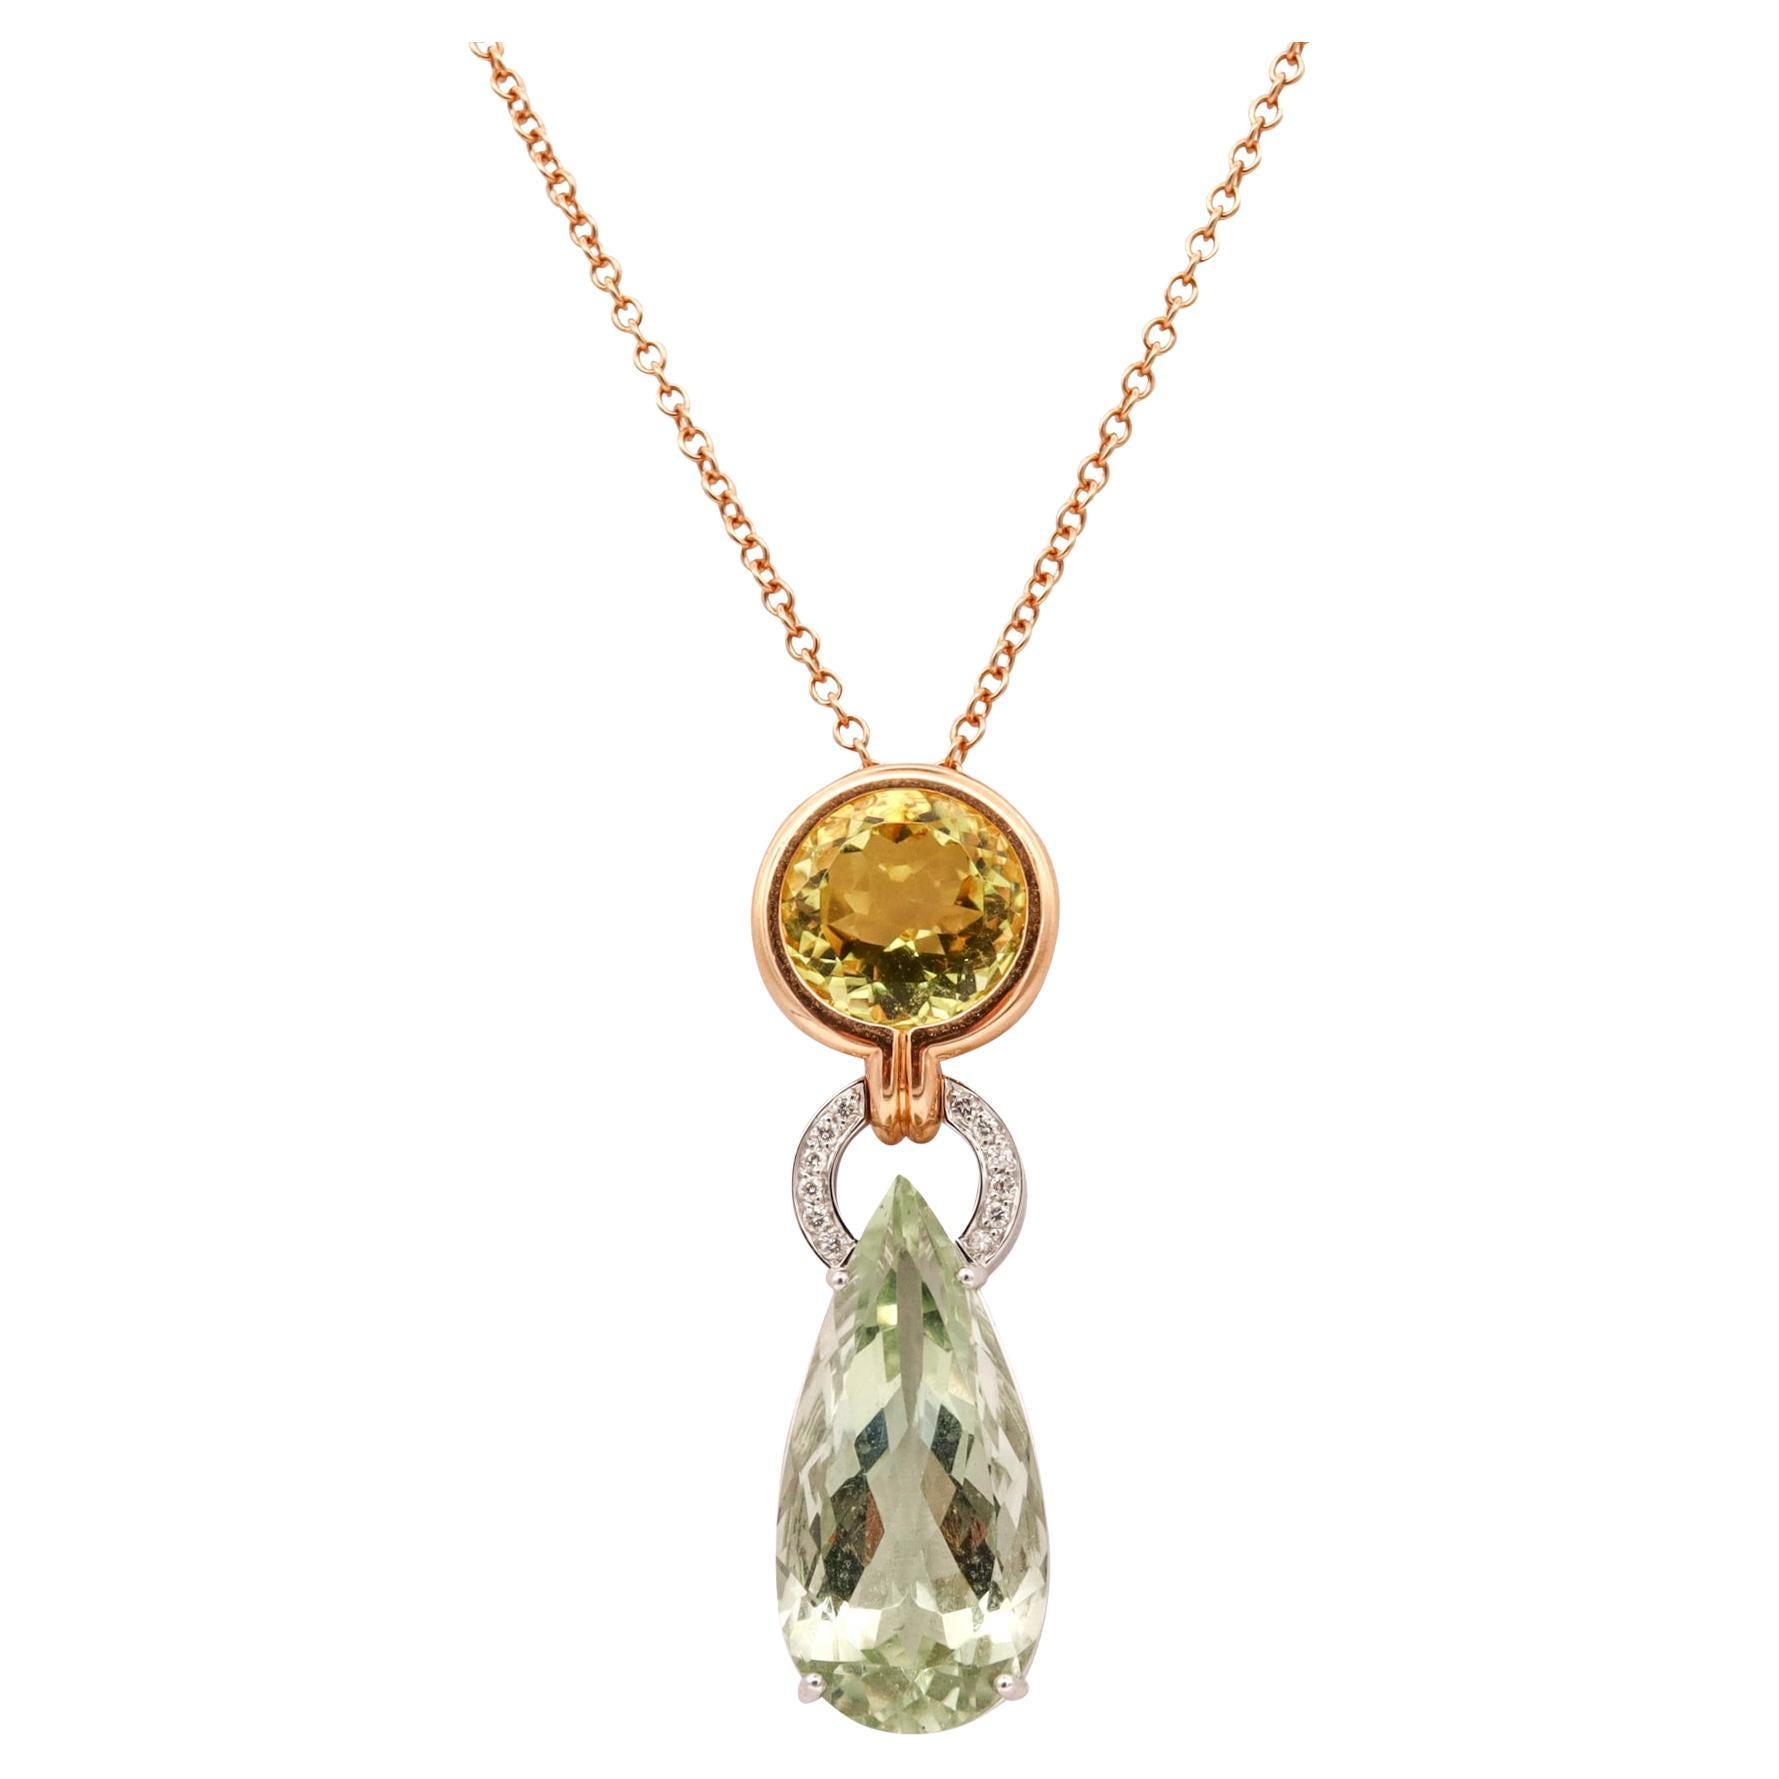 Salavetti Milano Chained Necklace 18Kt Rose Gold 26.85 Cts Diamonds & Gemstones